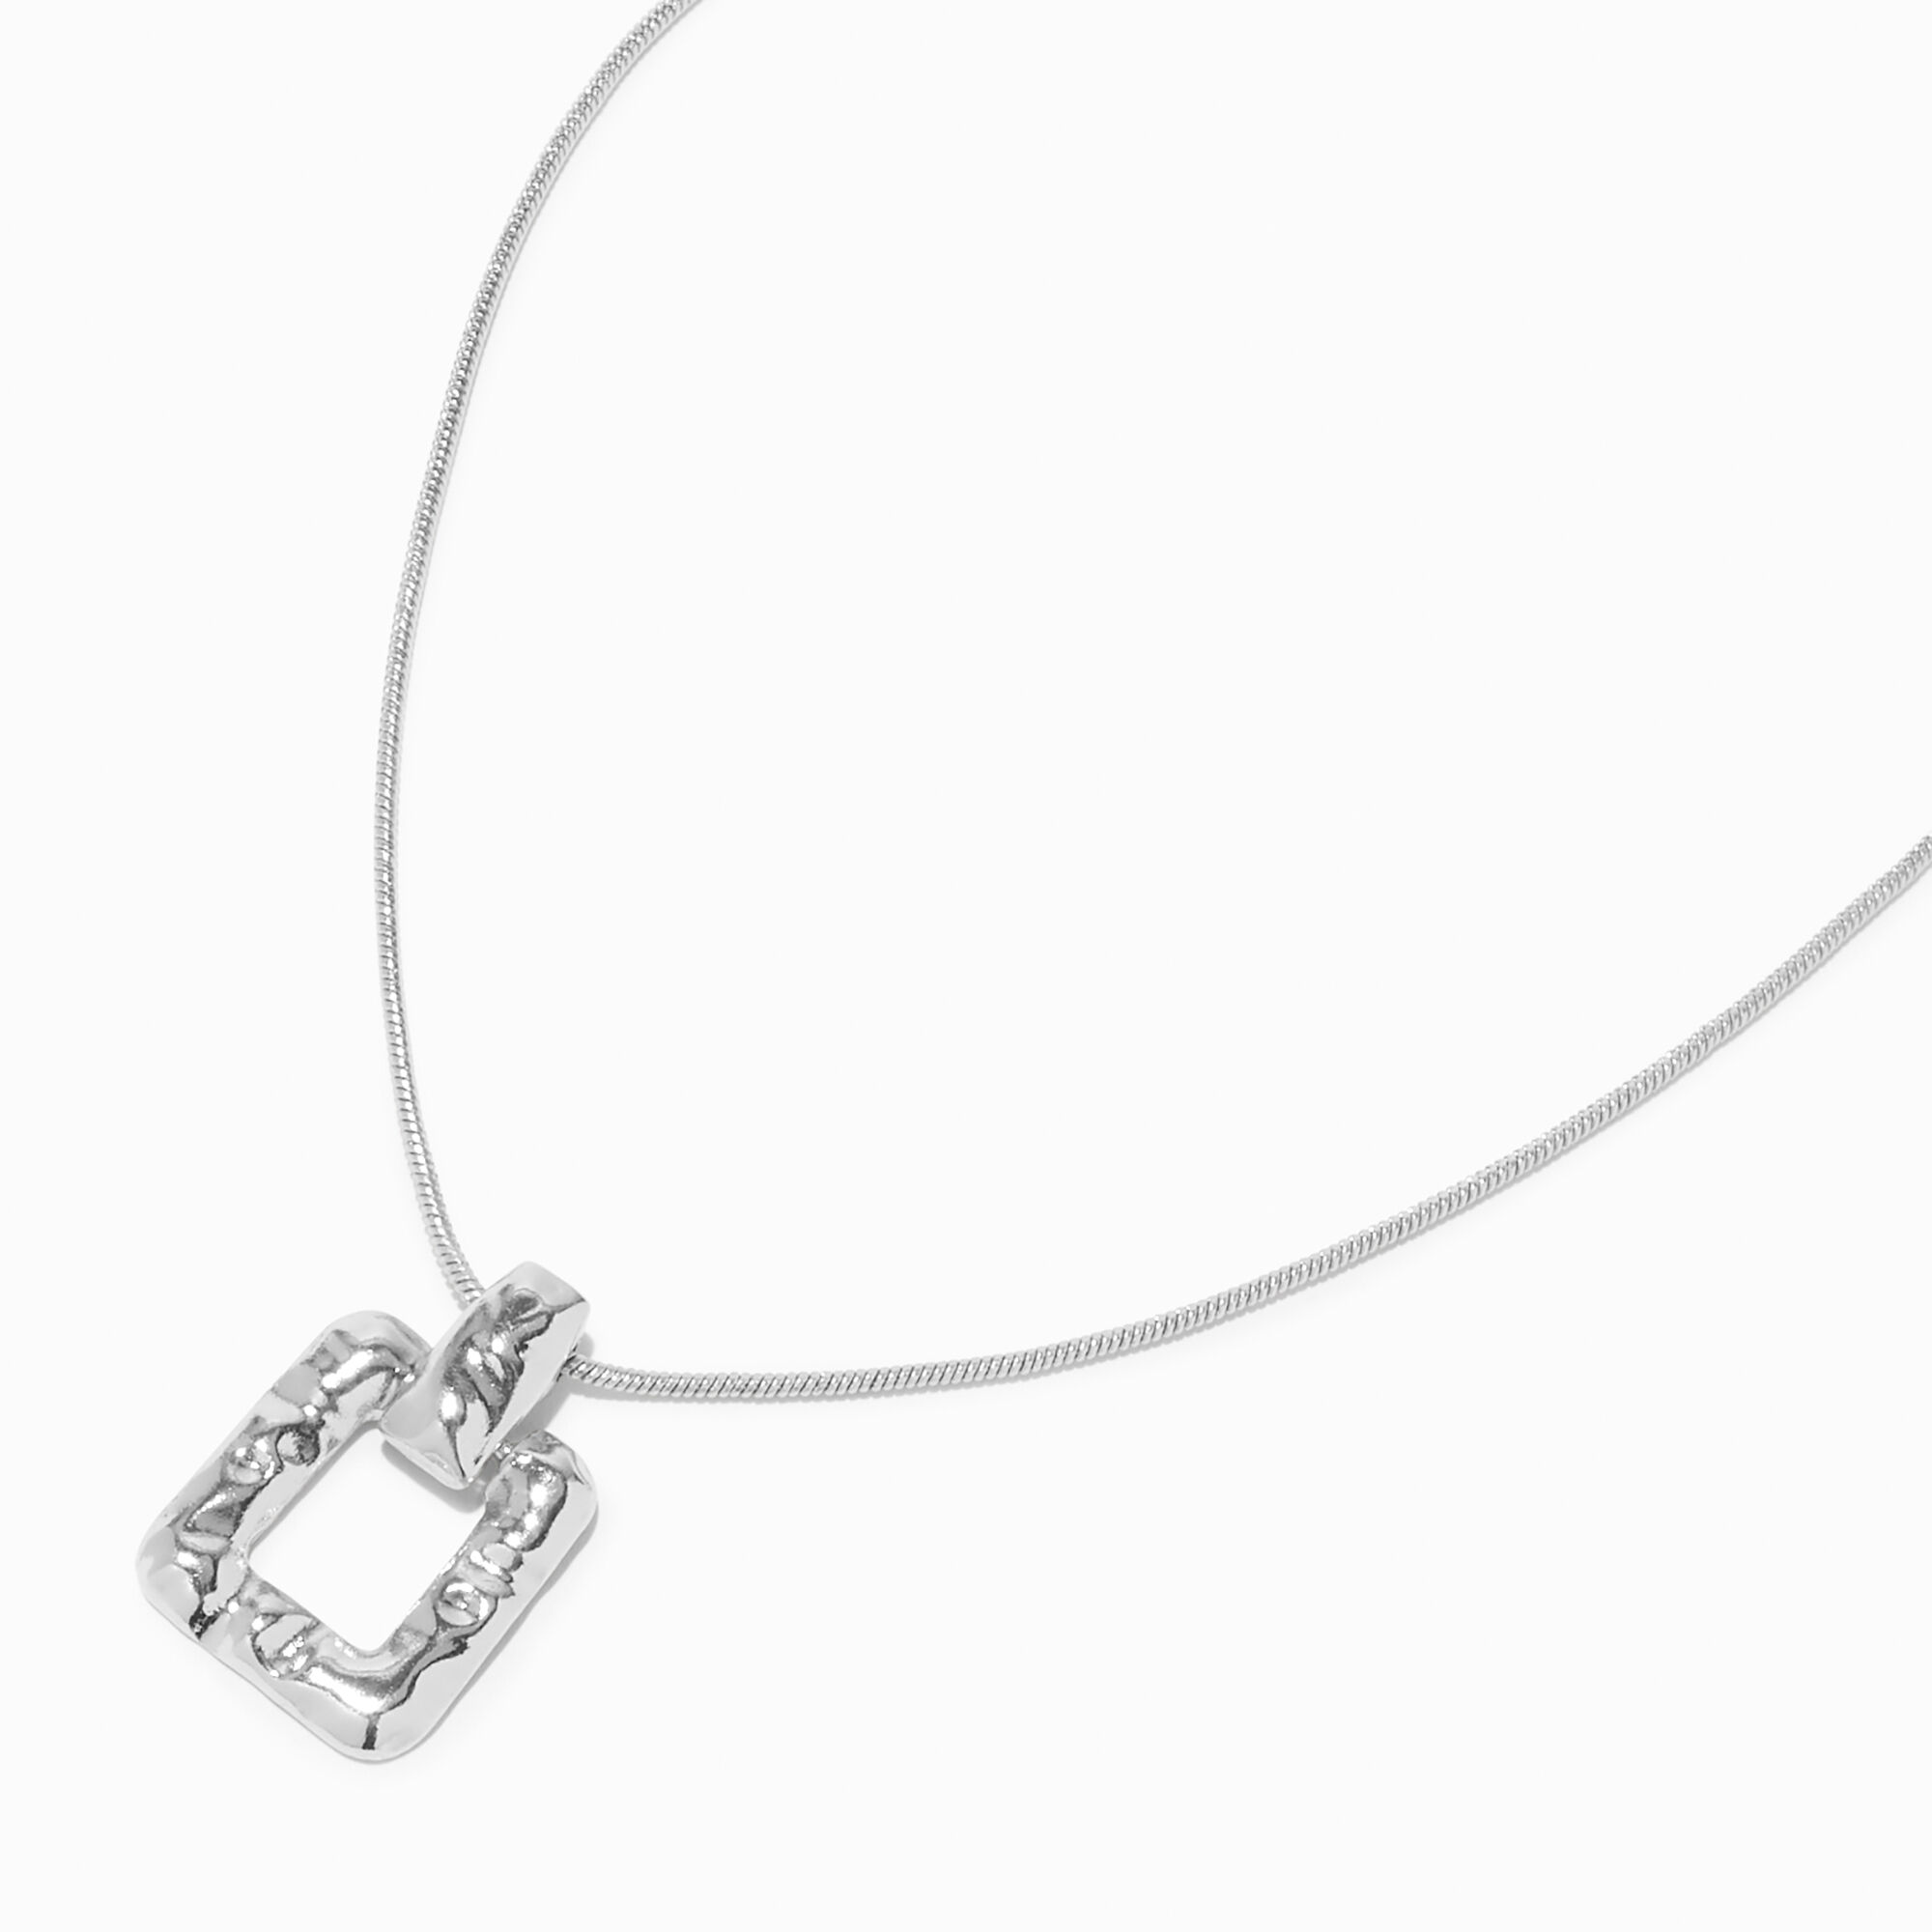 View Claires Tone Textured Square Door Knocker Pendant Necklace Silver information